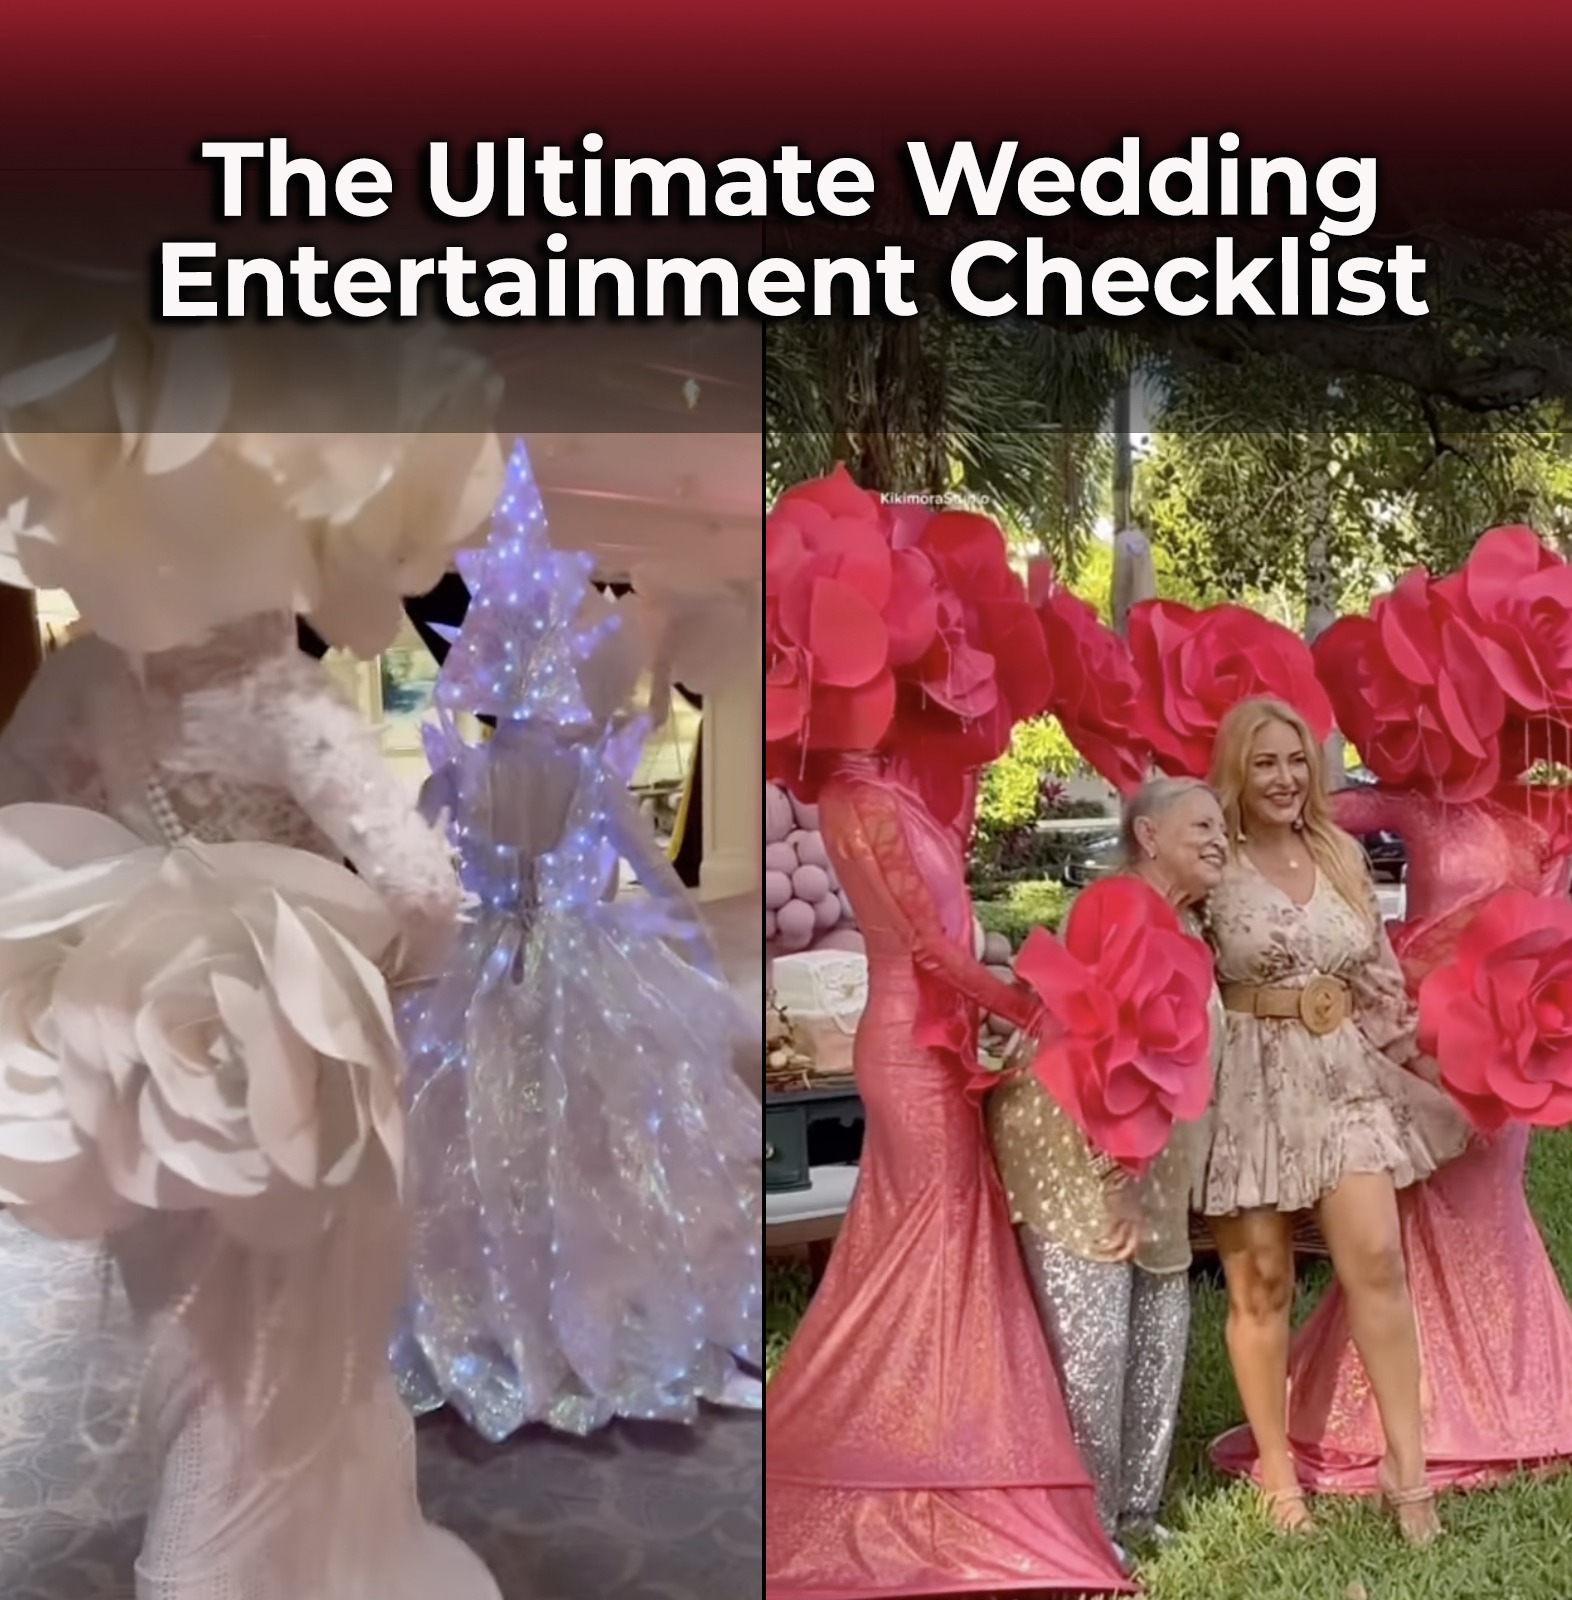 a picture of roses characters in red, cream, a fantasy white chracter with led-lights, guests and the phrase The Ultimate Wedding Entertainment Checklist"